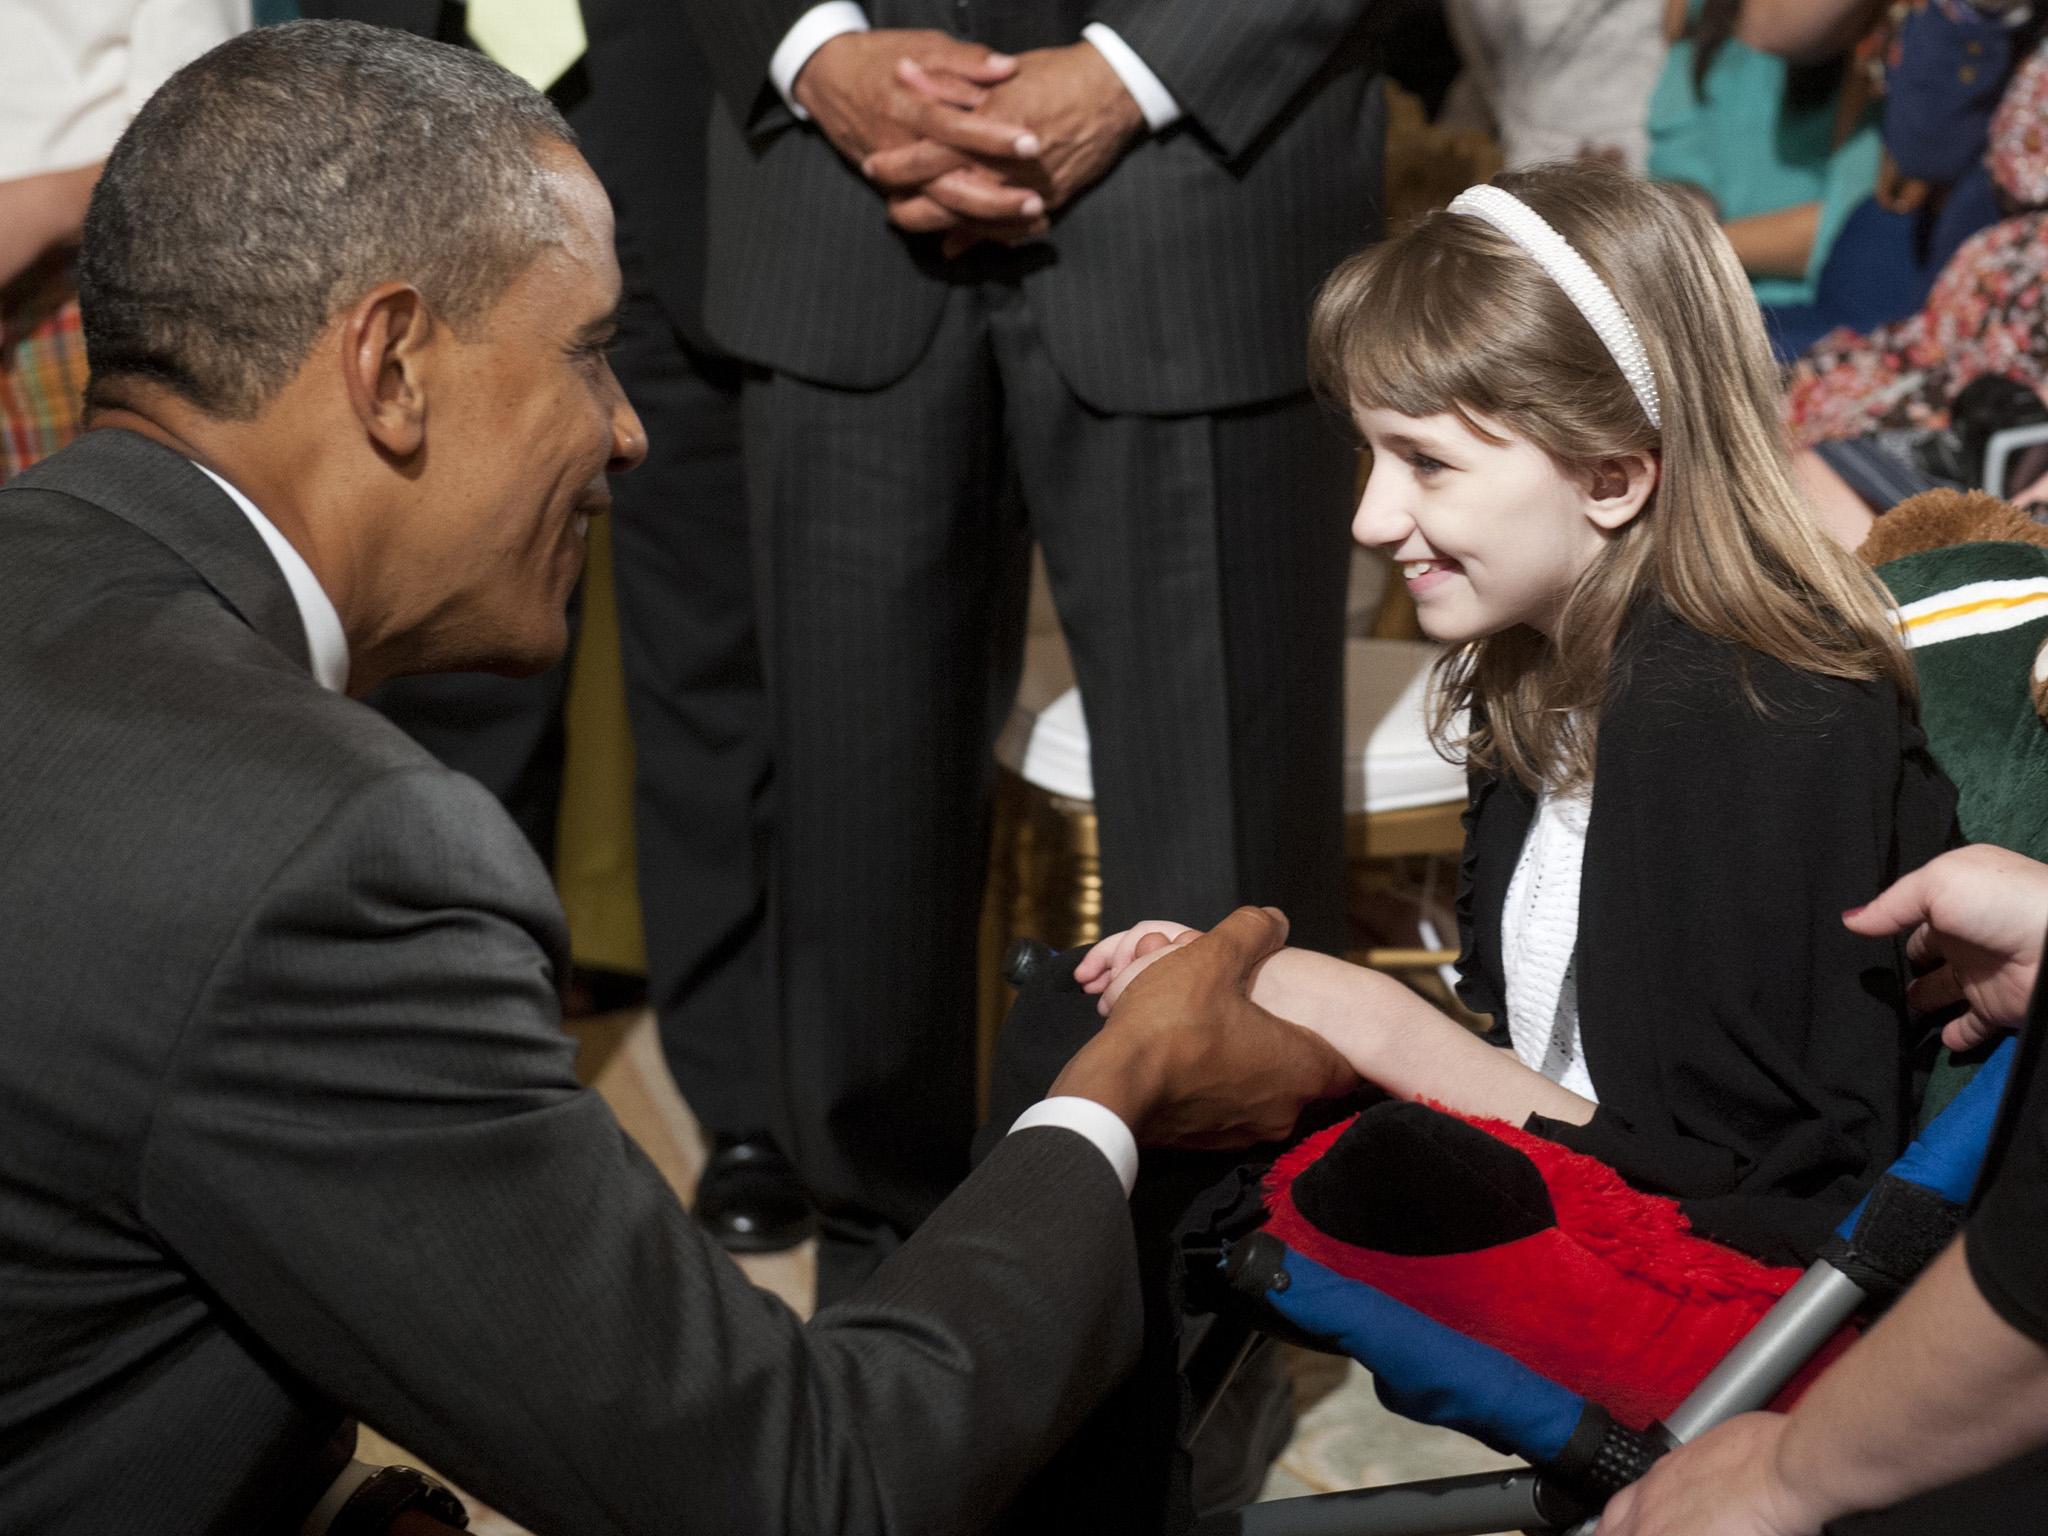 US President Barack Obama greets 11-year-old Haley Klepper during a ceremony honouring the 2012 NCAA Women’s College Basketball Champion Baylor Bears in 2012. Klepper, who suffers from a rare mitochondrial disease, calls herself the team’s ‘biggest fan’